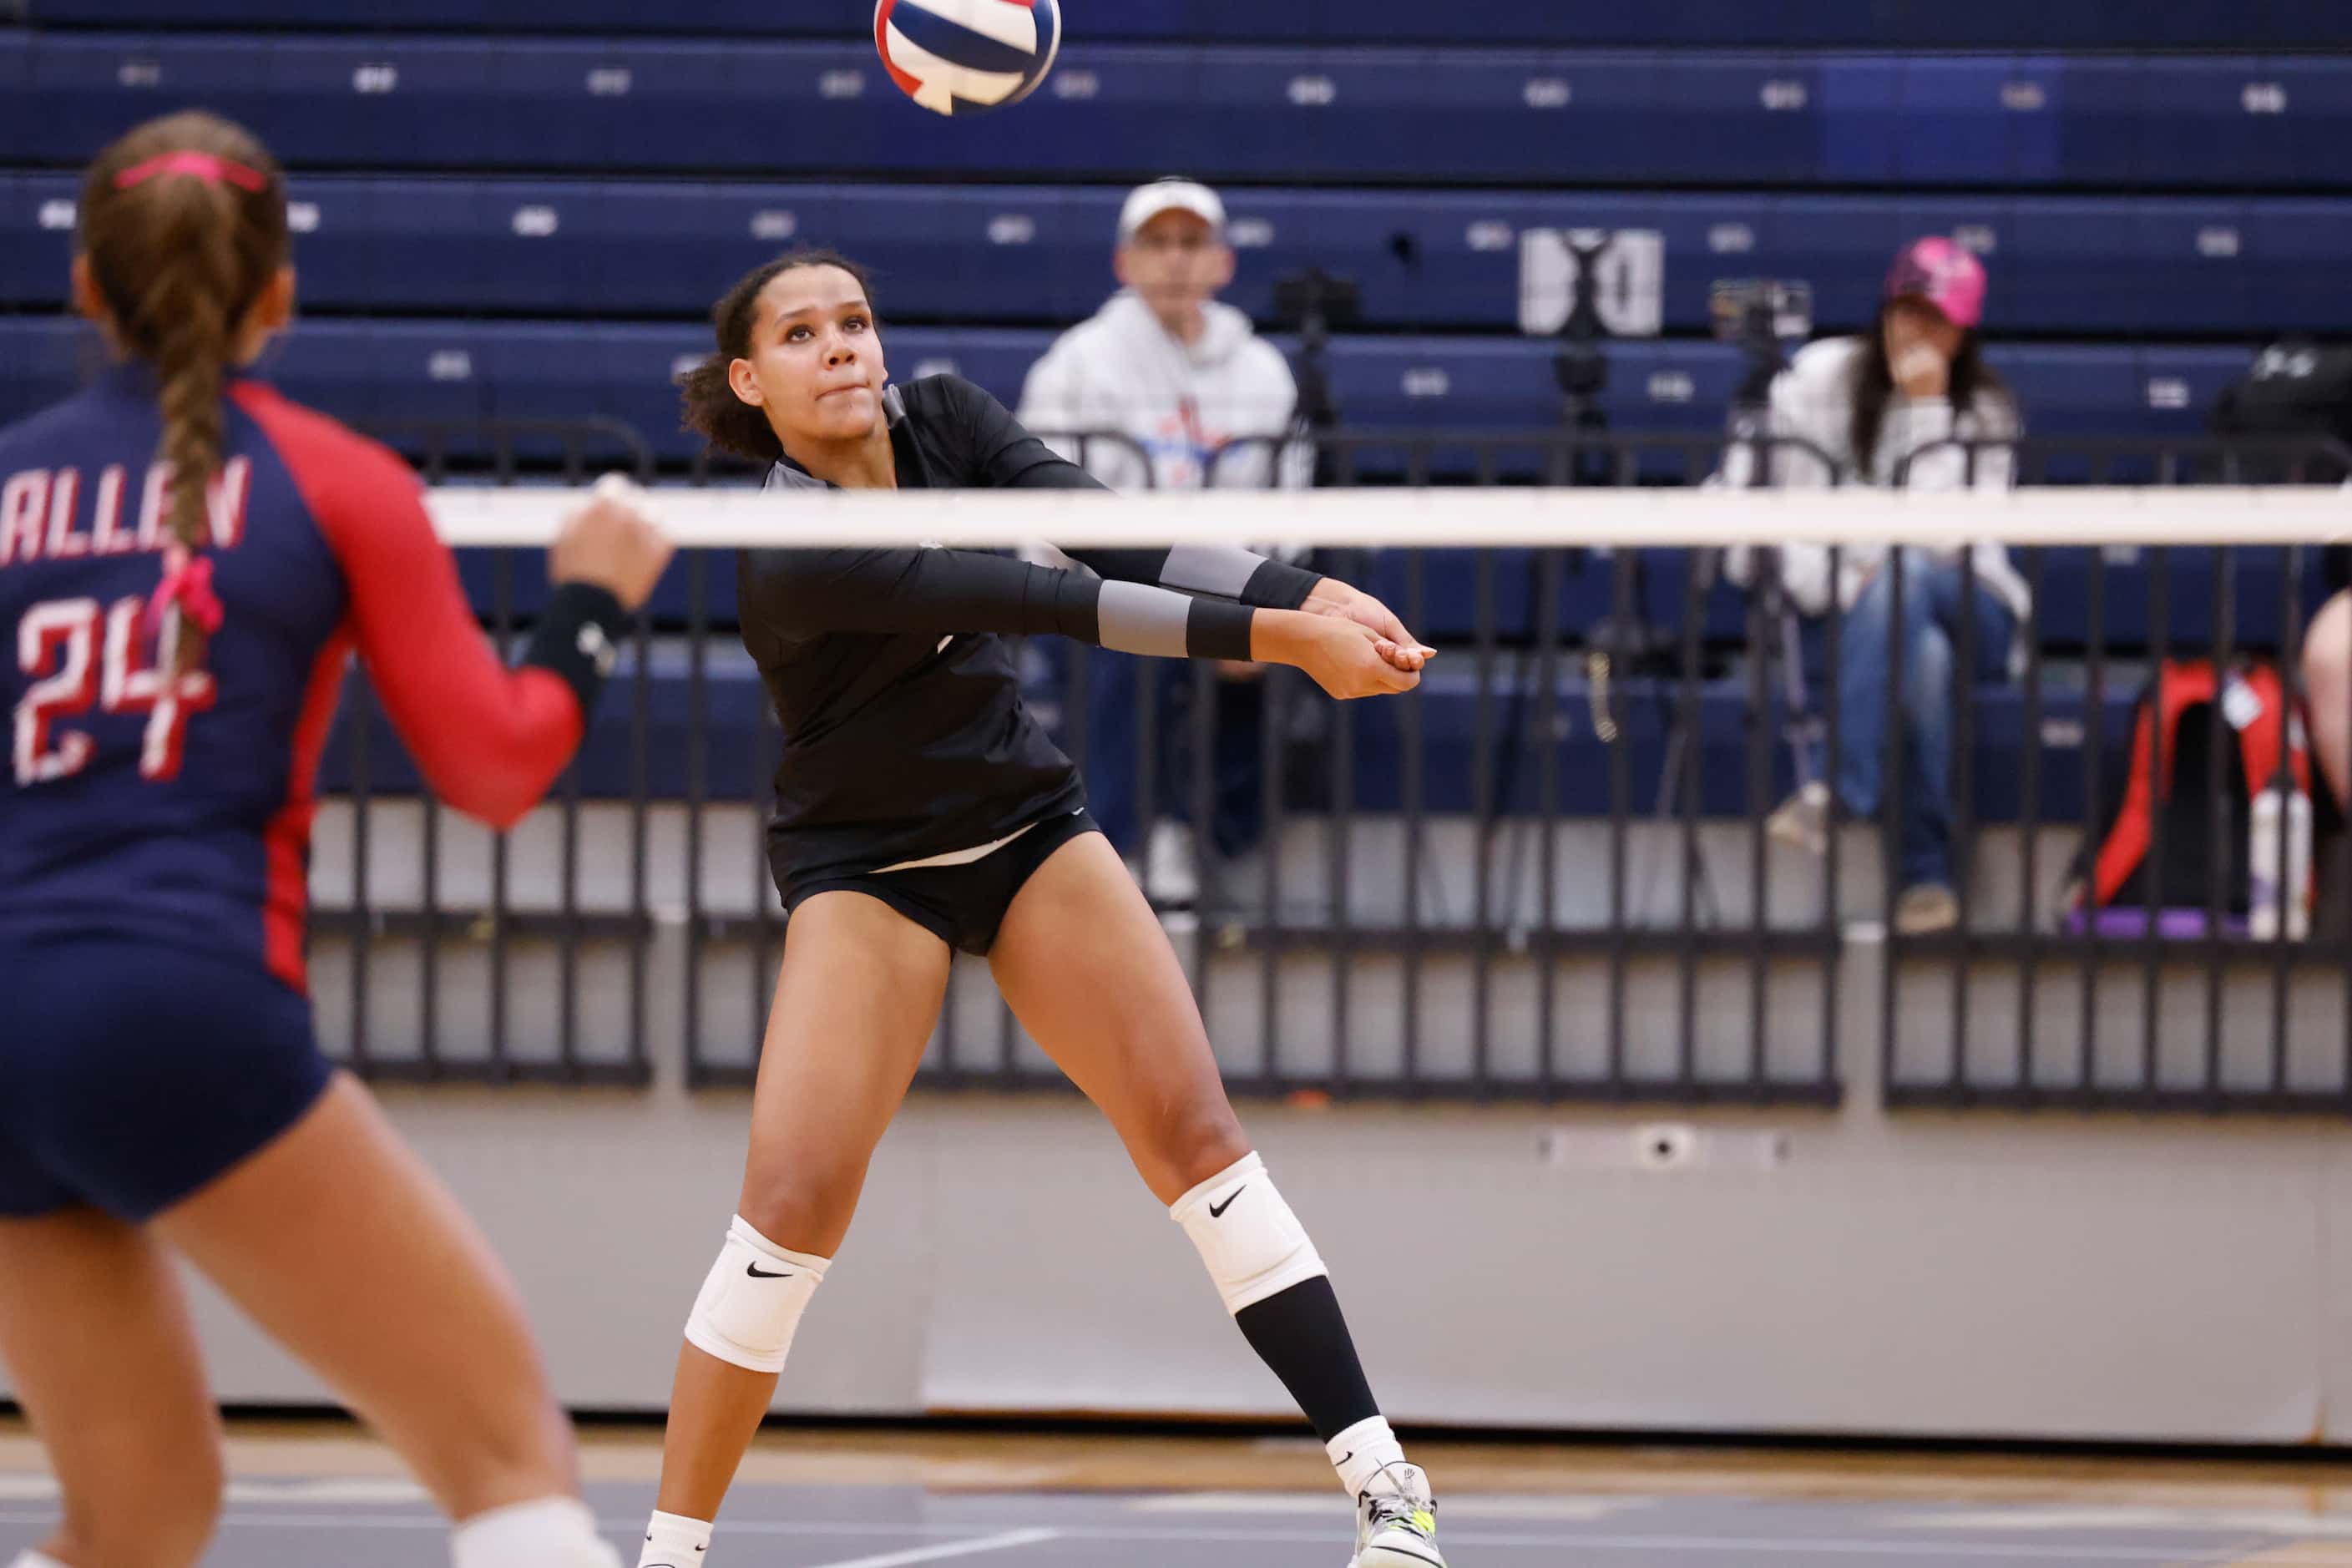 Denton Guyer senior Kyndal Stowers (5) volleys the ball after a serve from Allen in the...